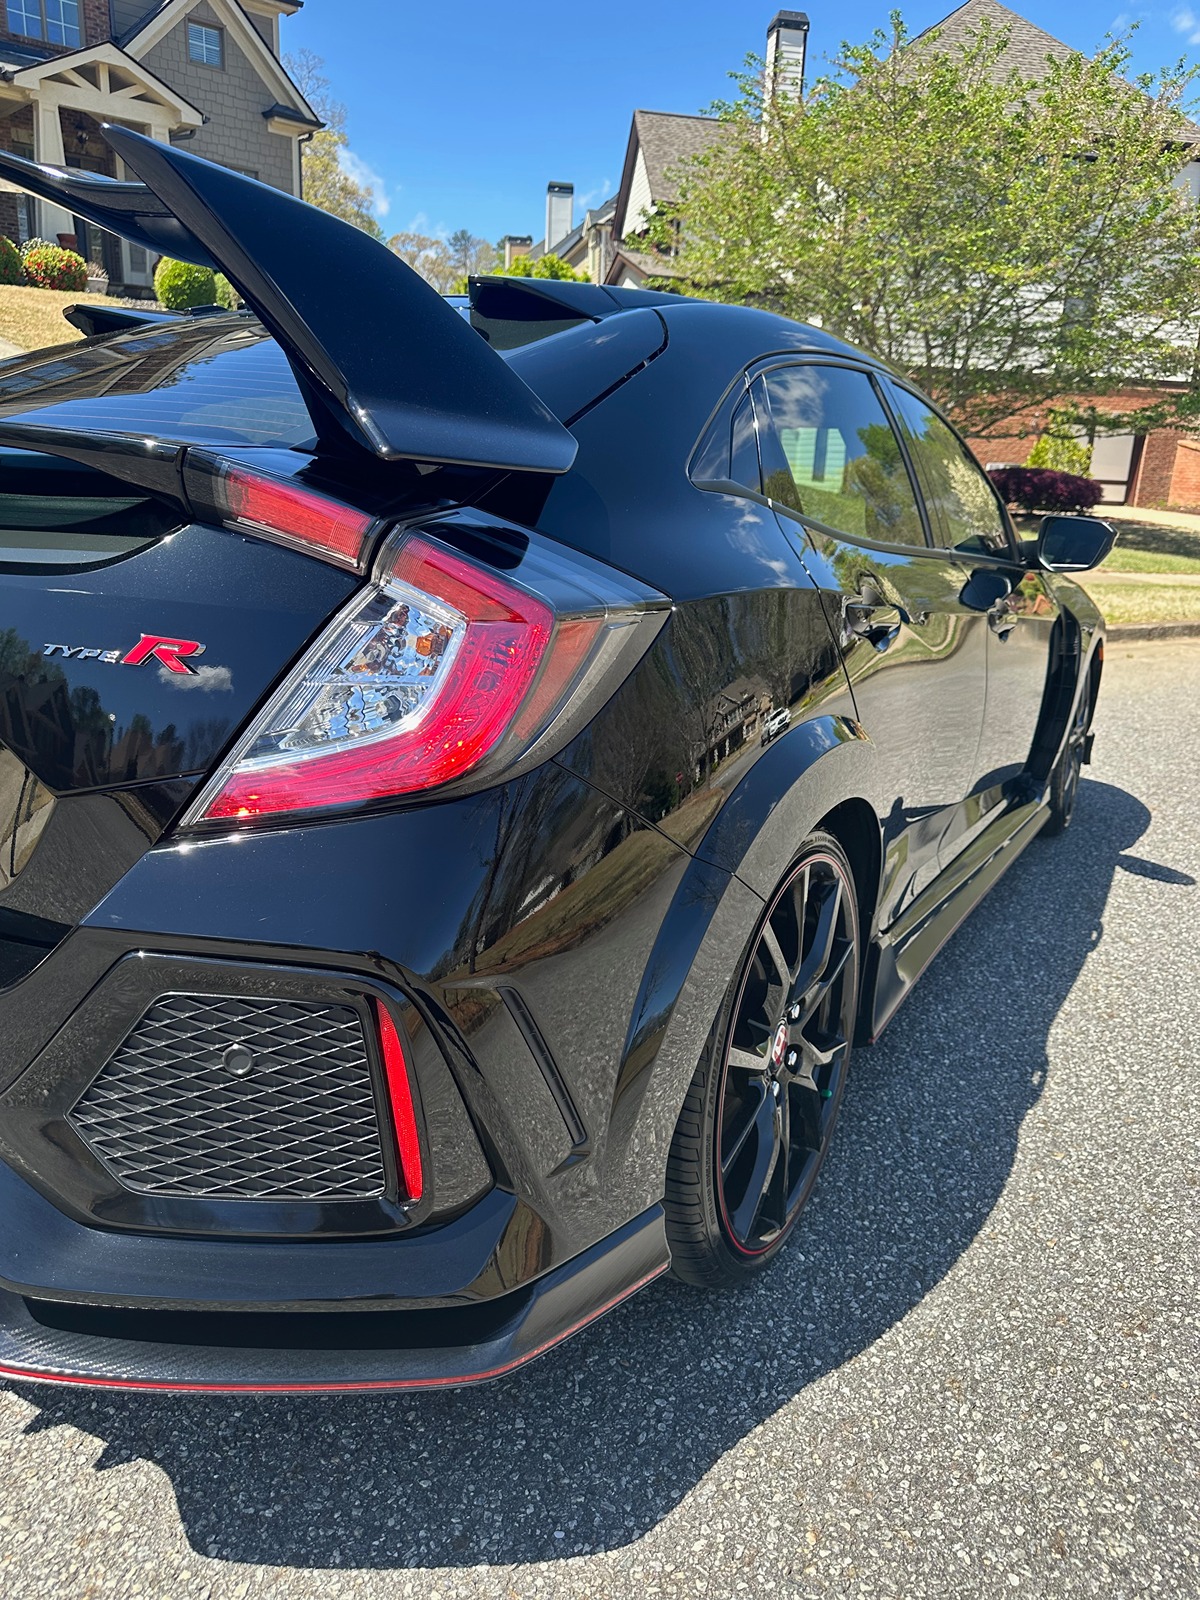 Honda Civic 10th gen Sold. 2019 Civic Type R for sale IMG_8135